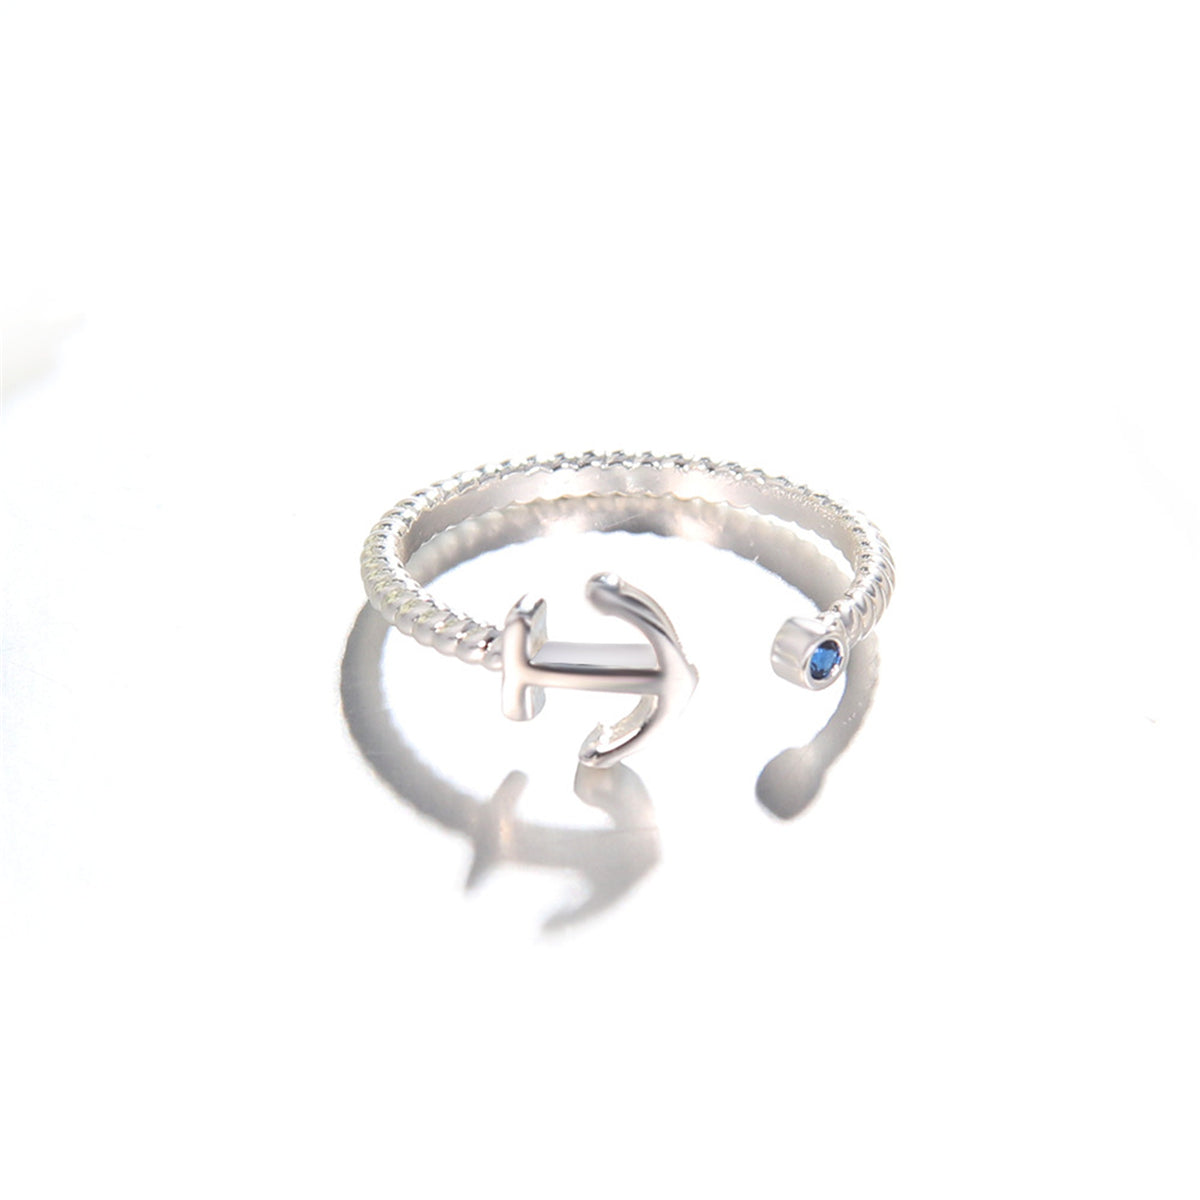 Blue Cubic Zirconia & Silver-Plated Anchor Open Ring